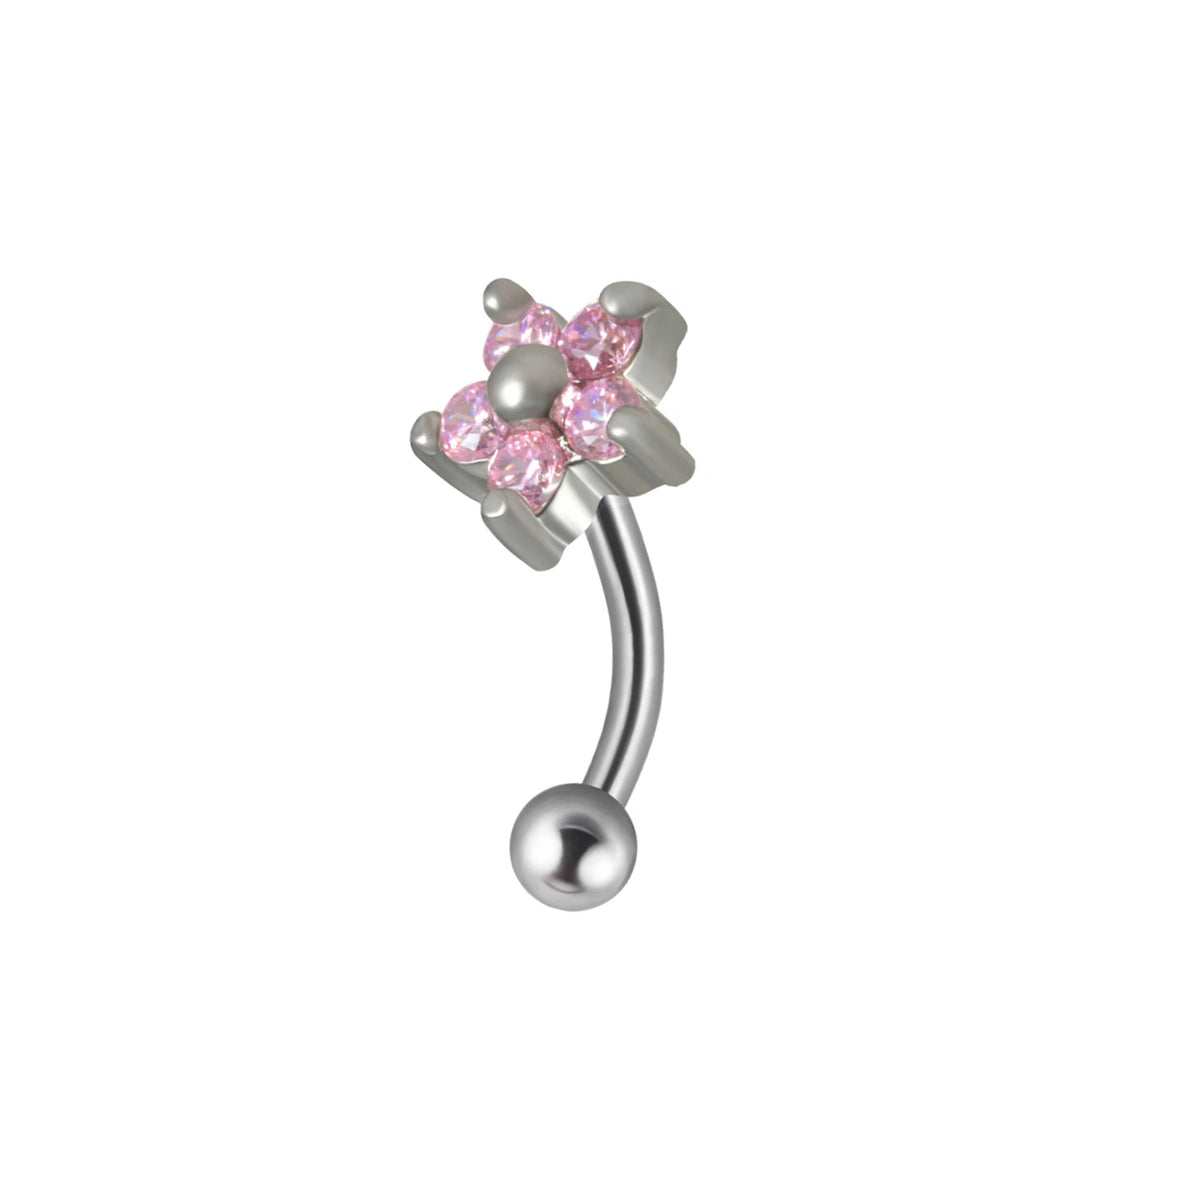 Cute jestrum piercing with clear pink rainbow diamond titanium curved barbell